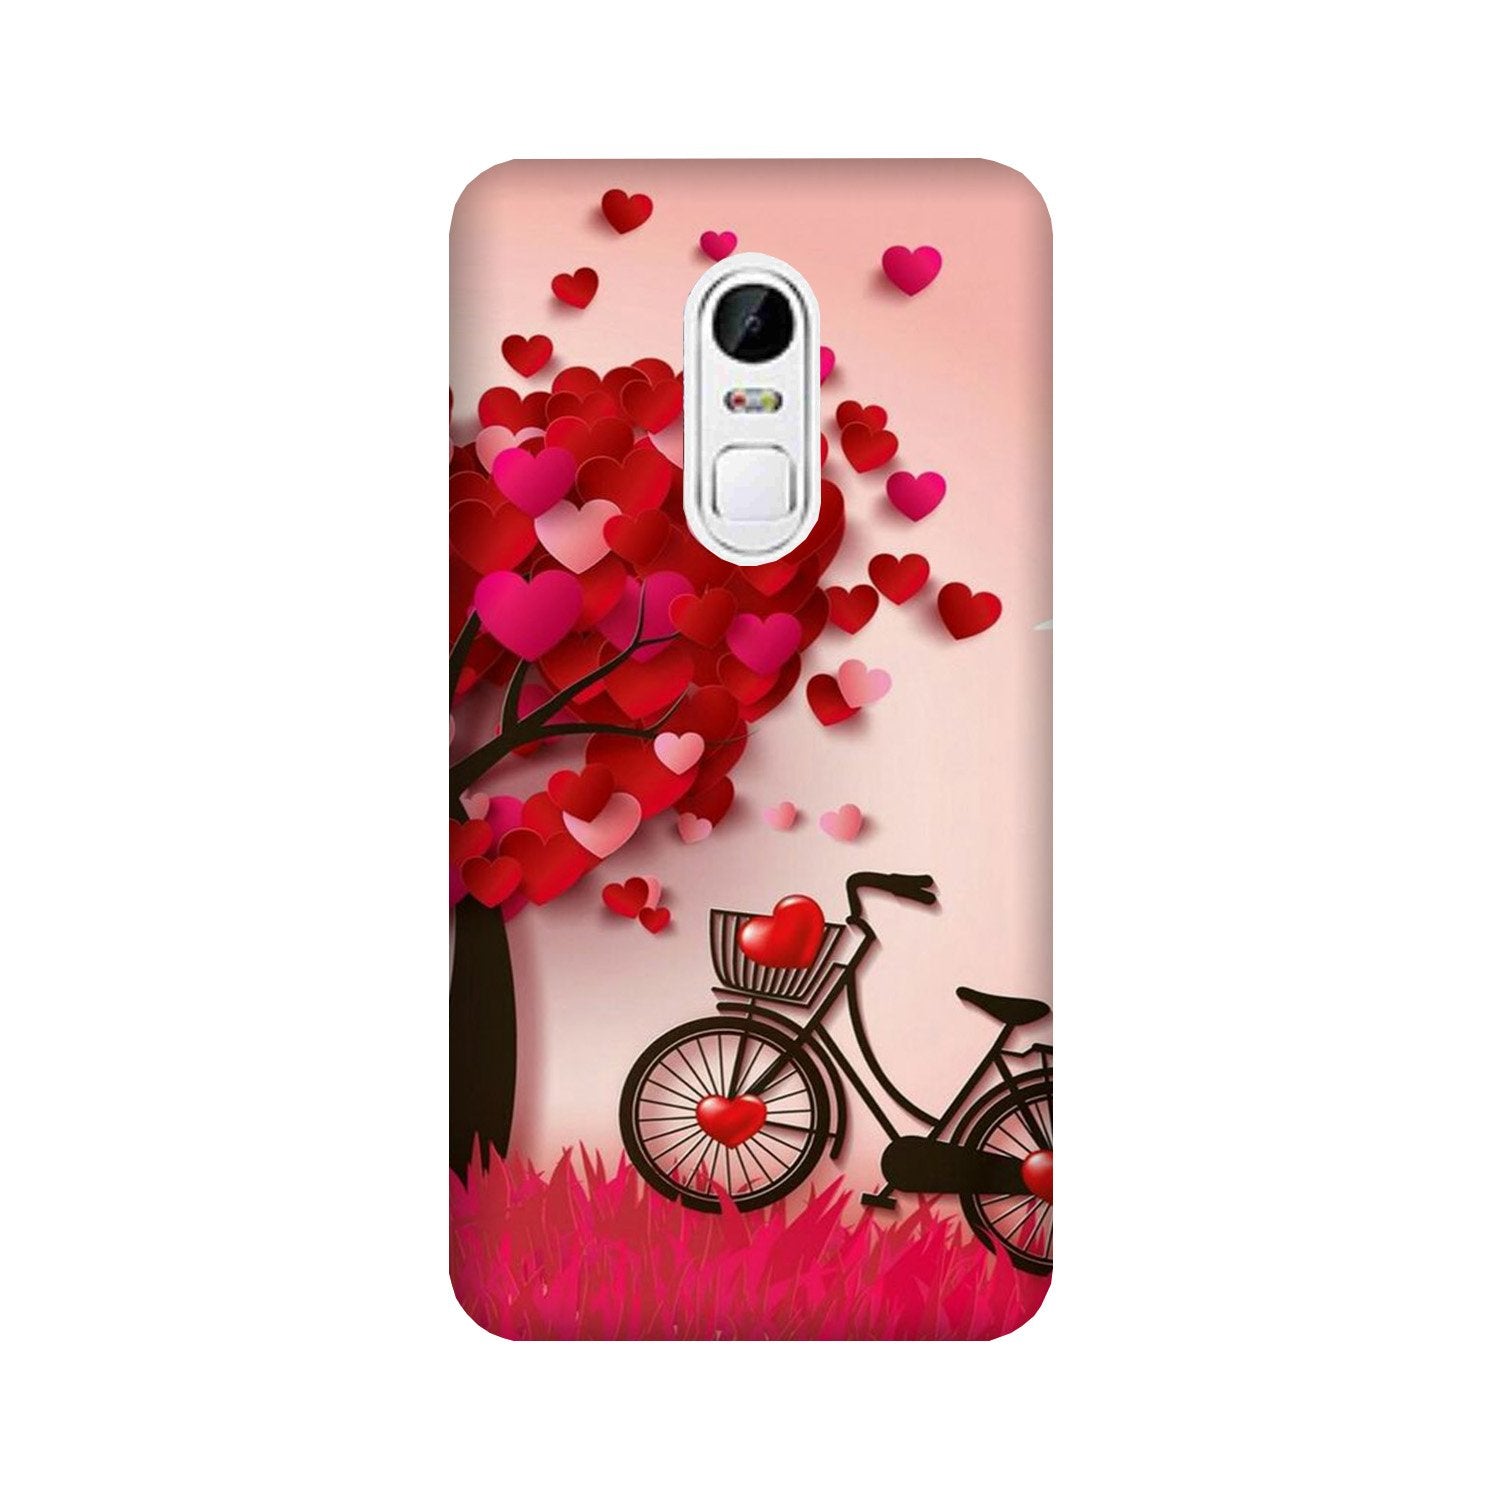 Red Heart Cycle Case for Lenovo Vibe X3 (Design No. 222)